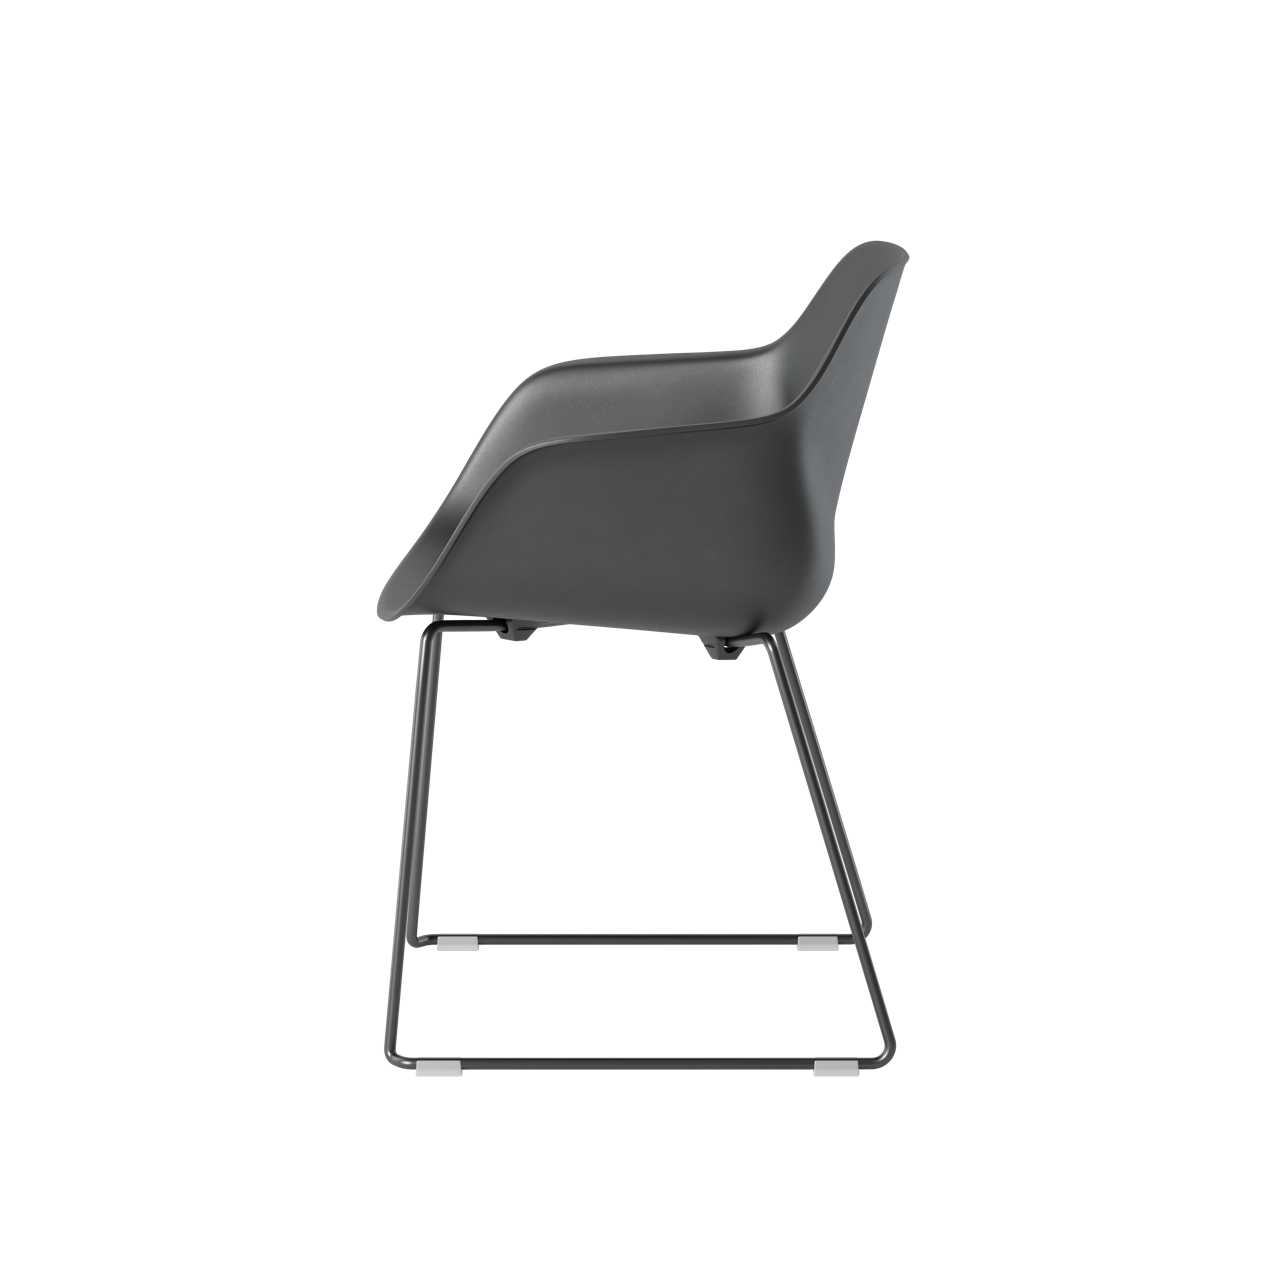 OCEE&FOUR – Chairs – FourMe 88 – Plastic shell - Skid Frame - Packshot Image 4 Large